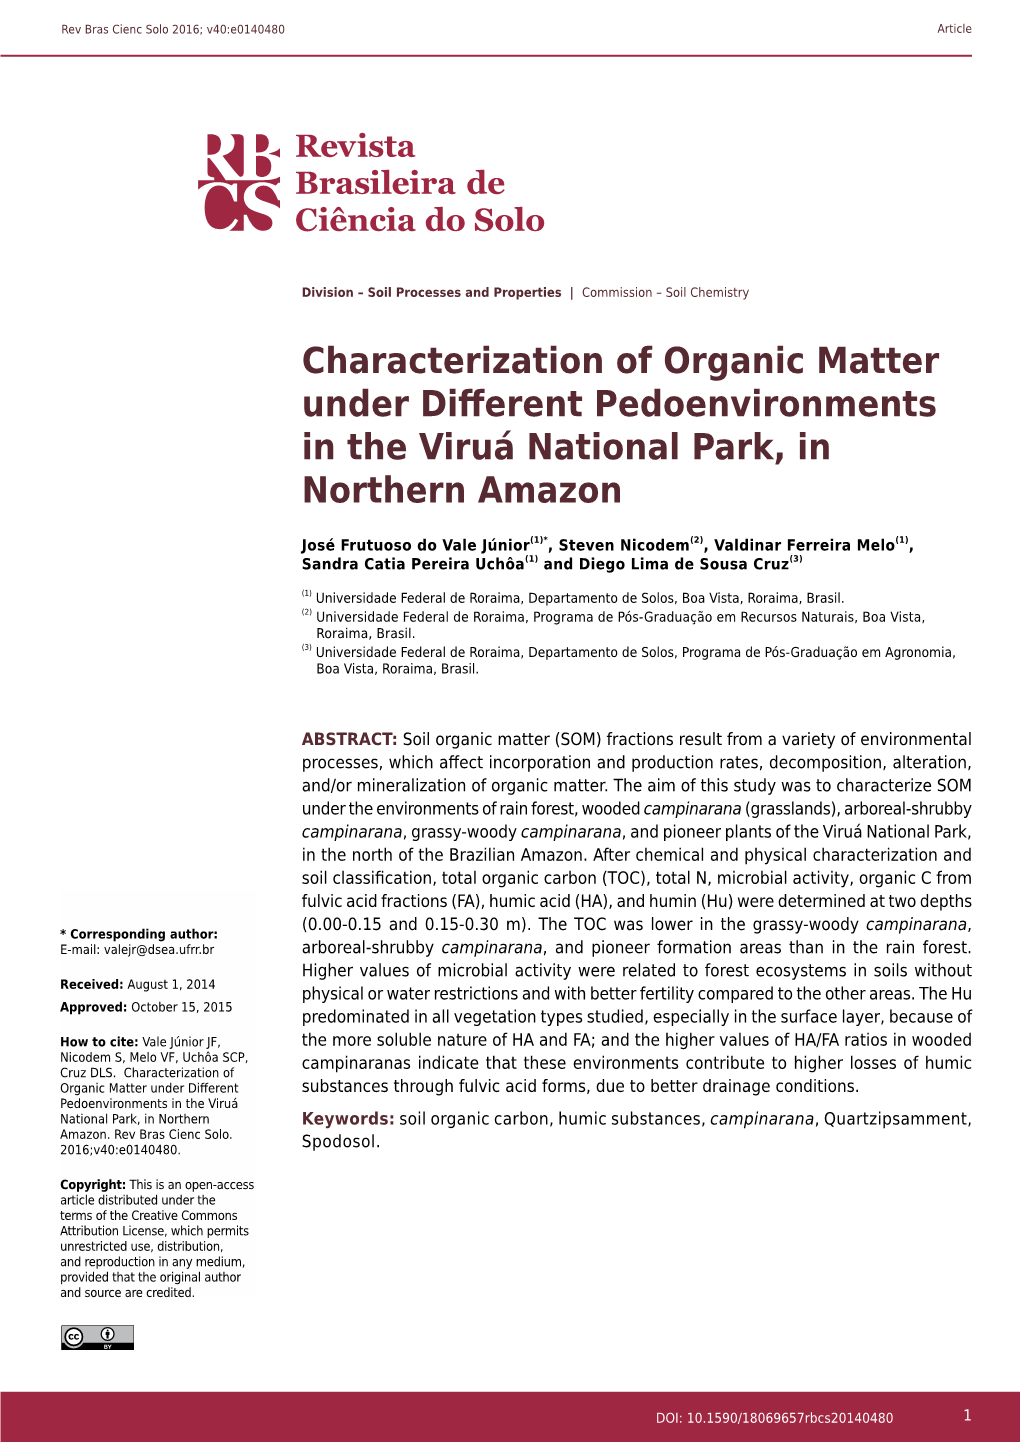 Characterization of Organic Matter Under Different Pedoenvironments in the Viruá National Park, in Northern Amazon